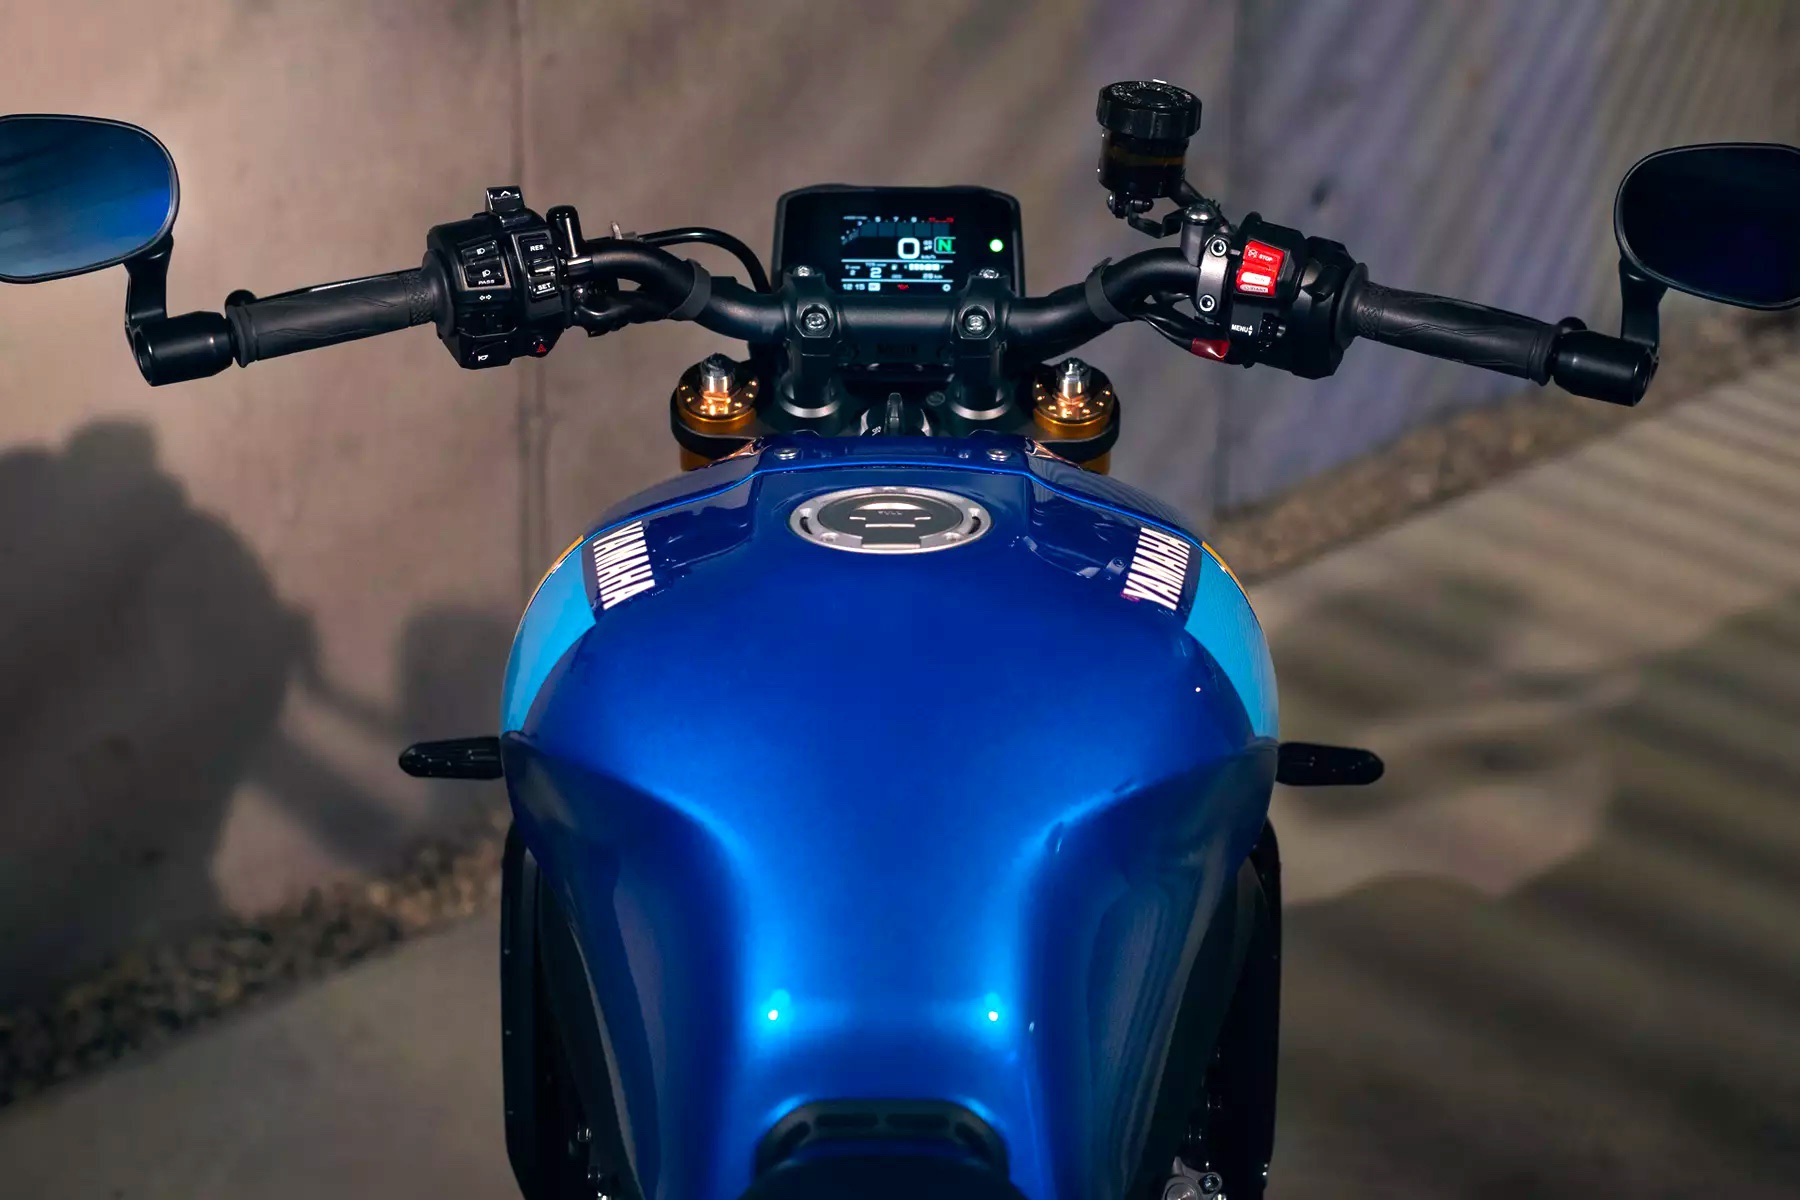 The 2022 Yamaha XSR900 motorcycle with dash detail and tank